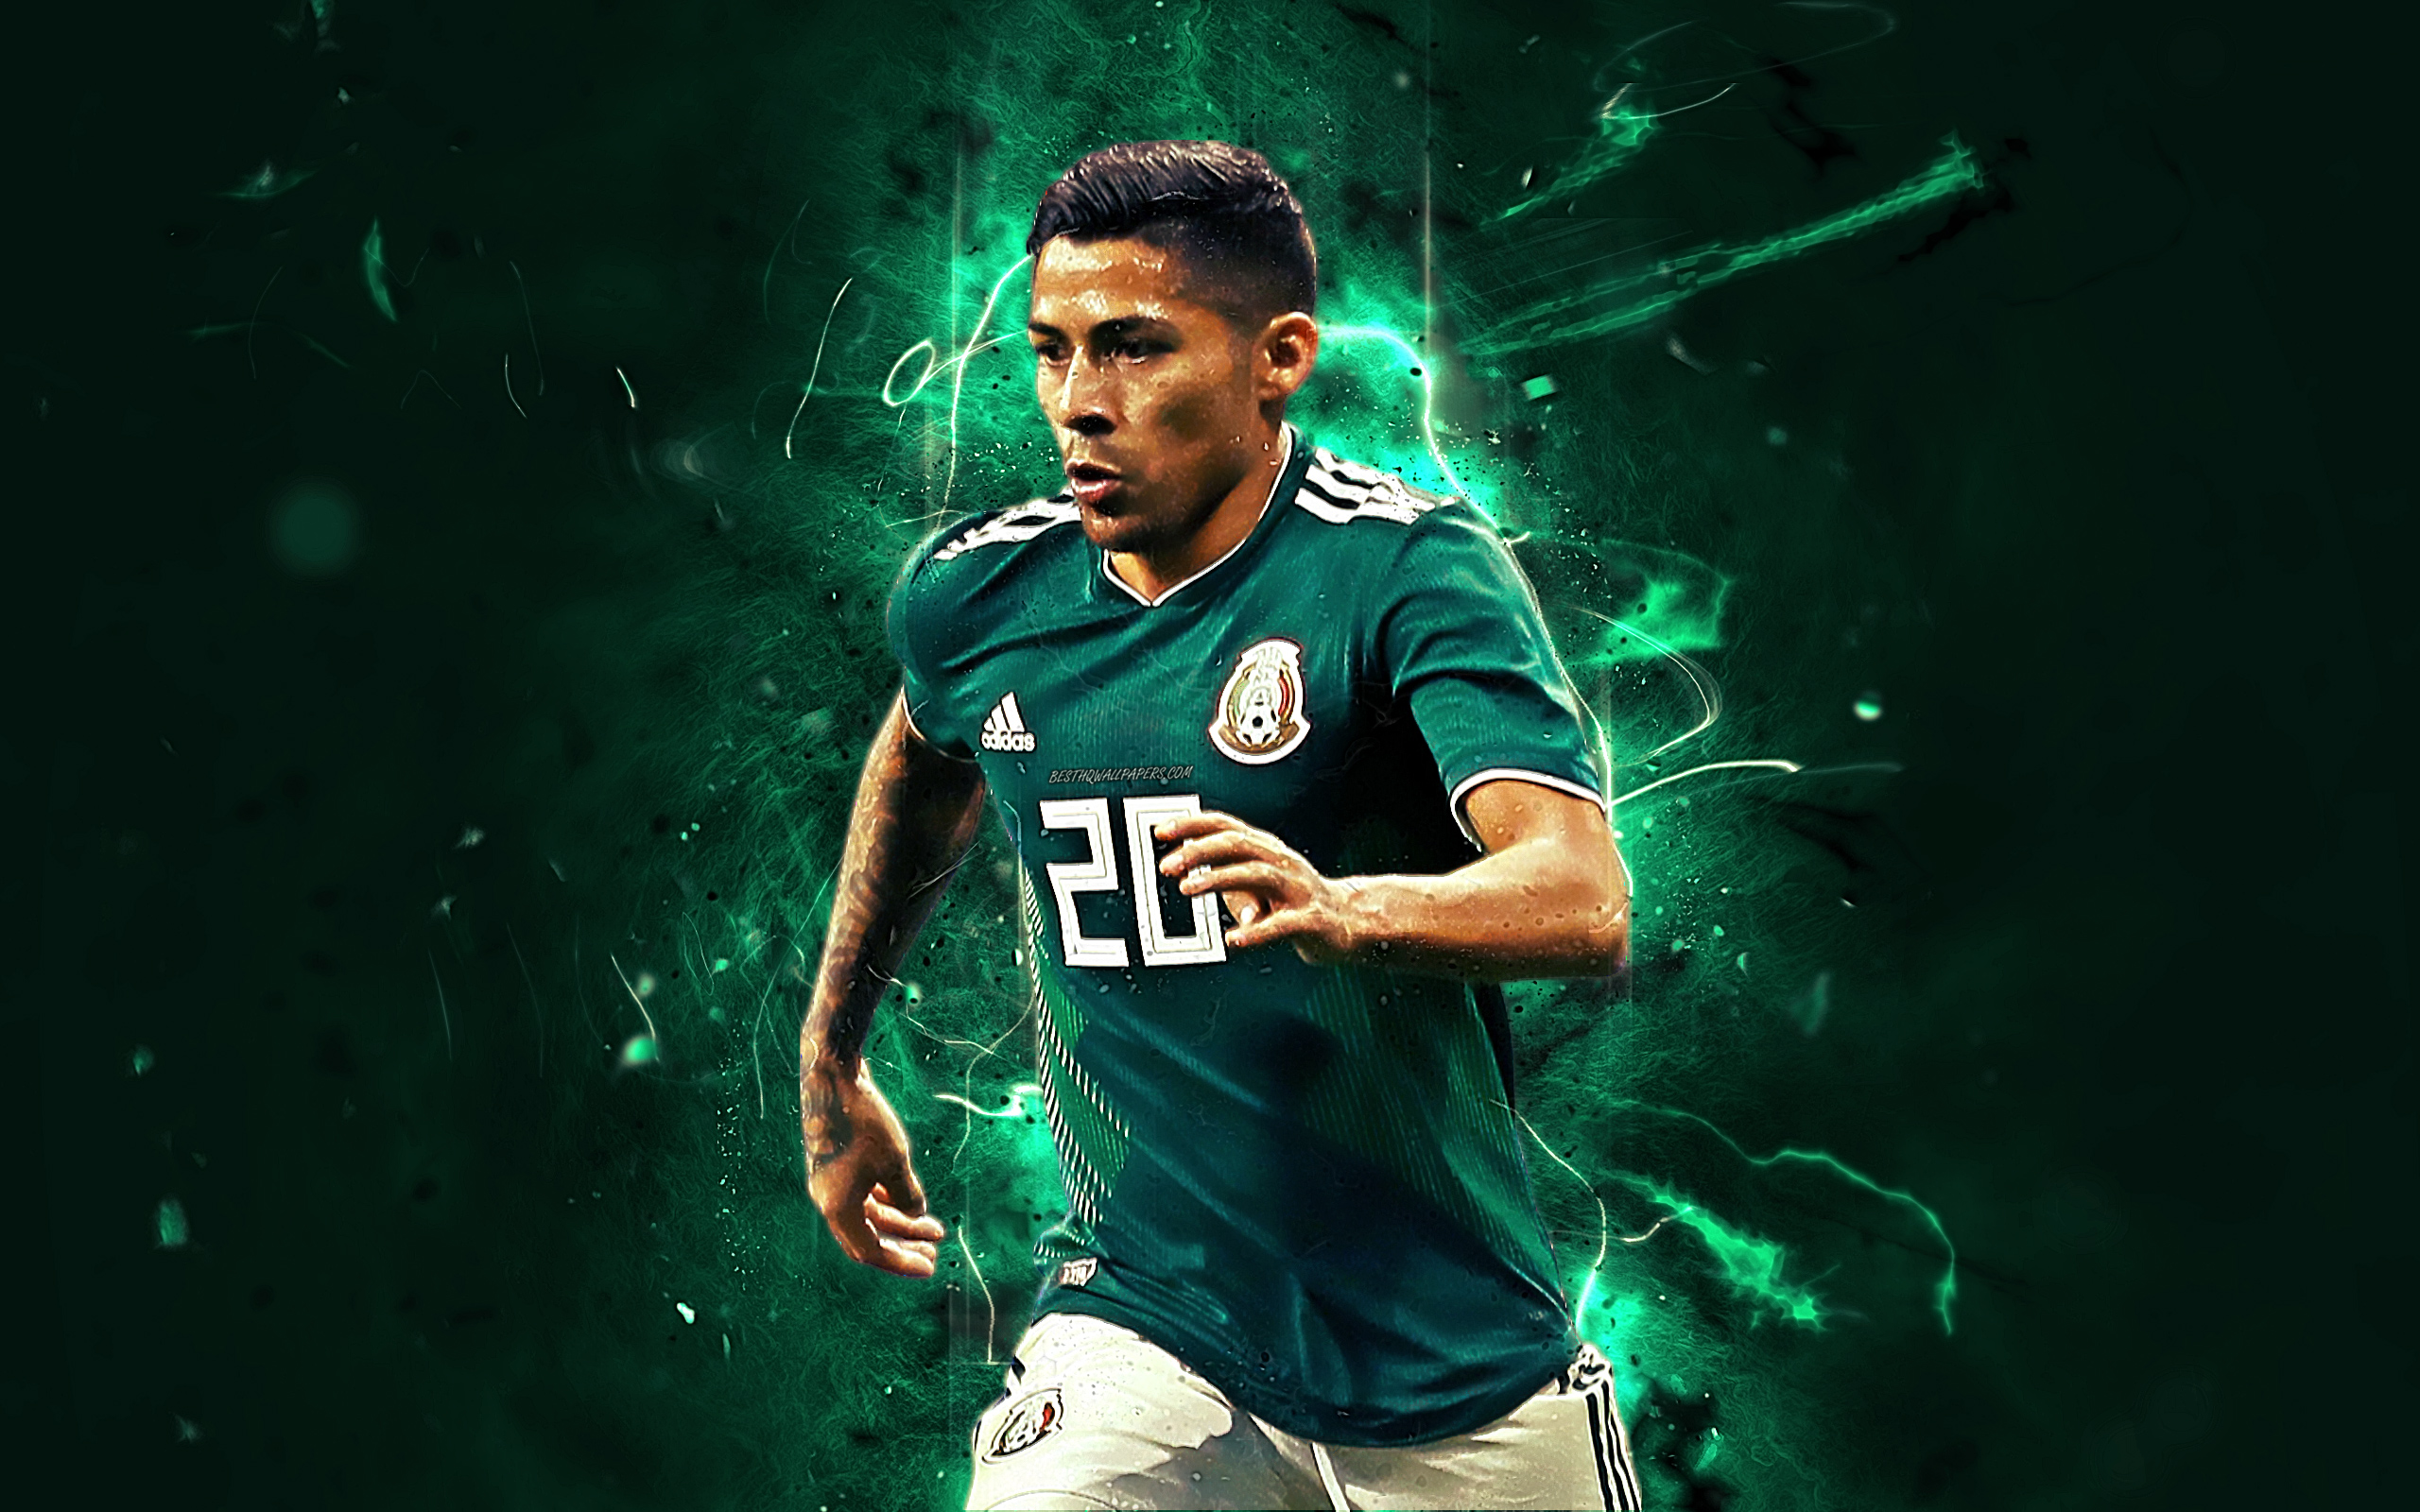 Mexico Soccer Team Wallpapers